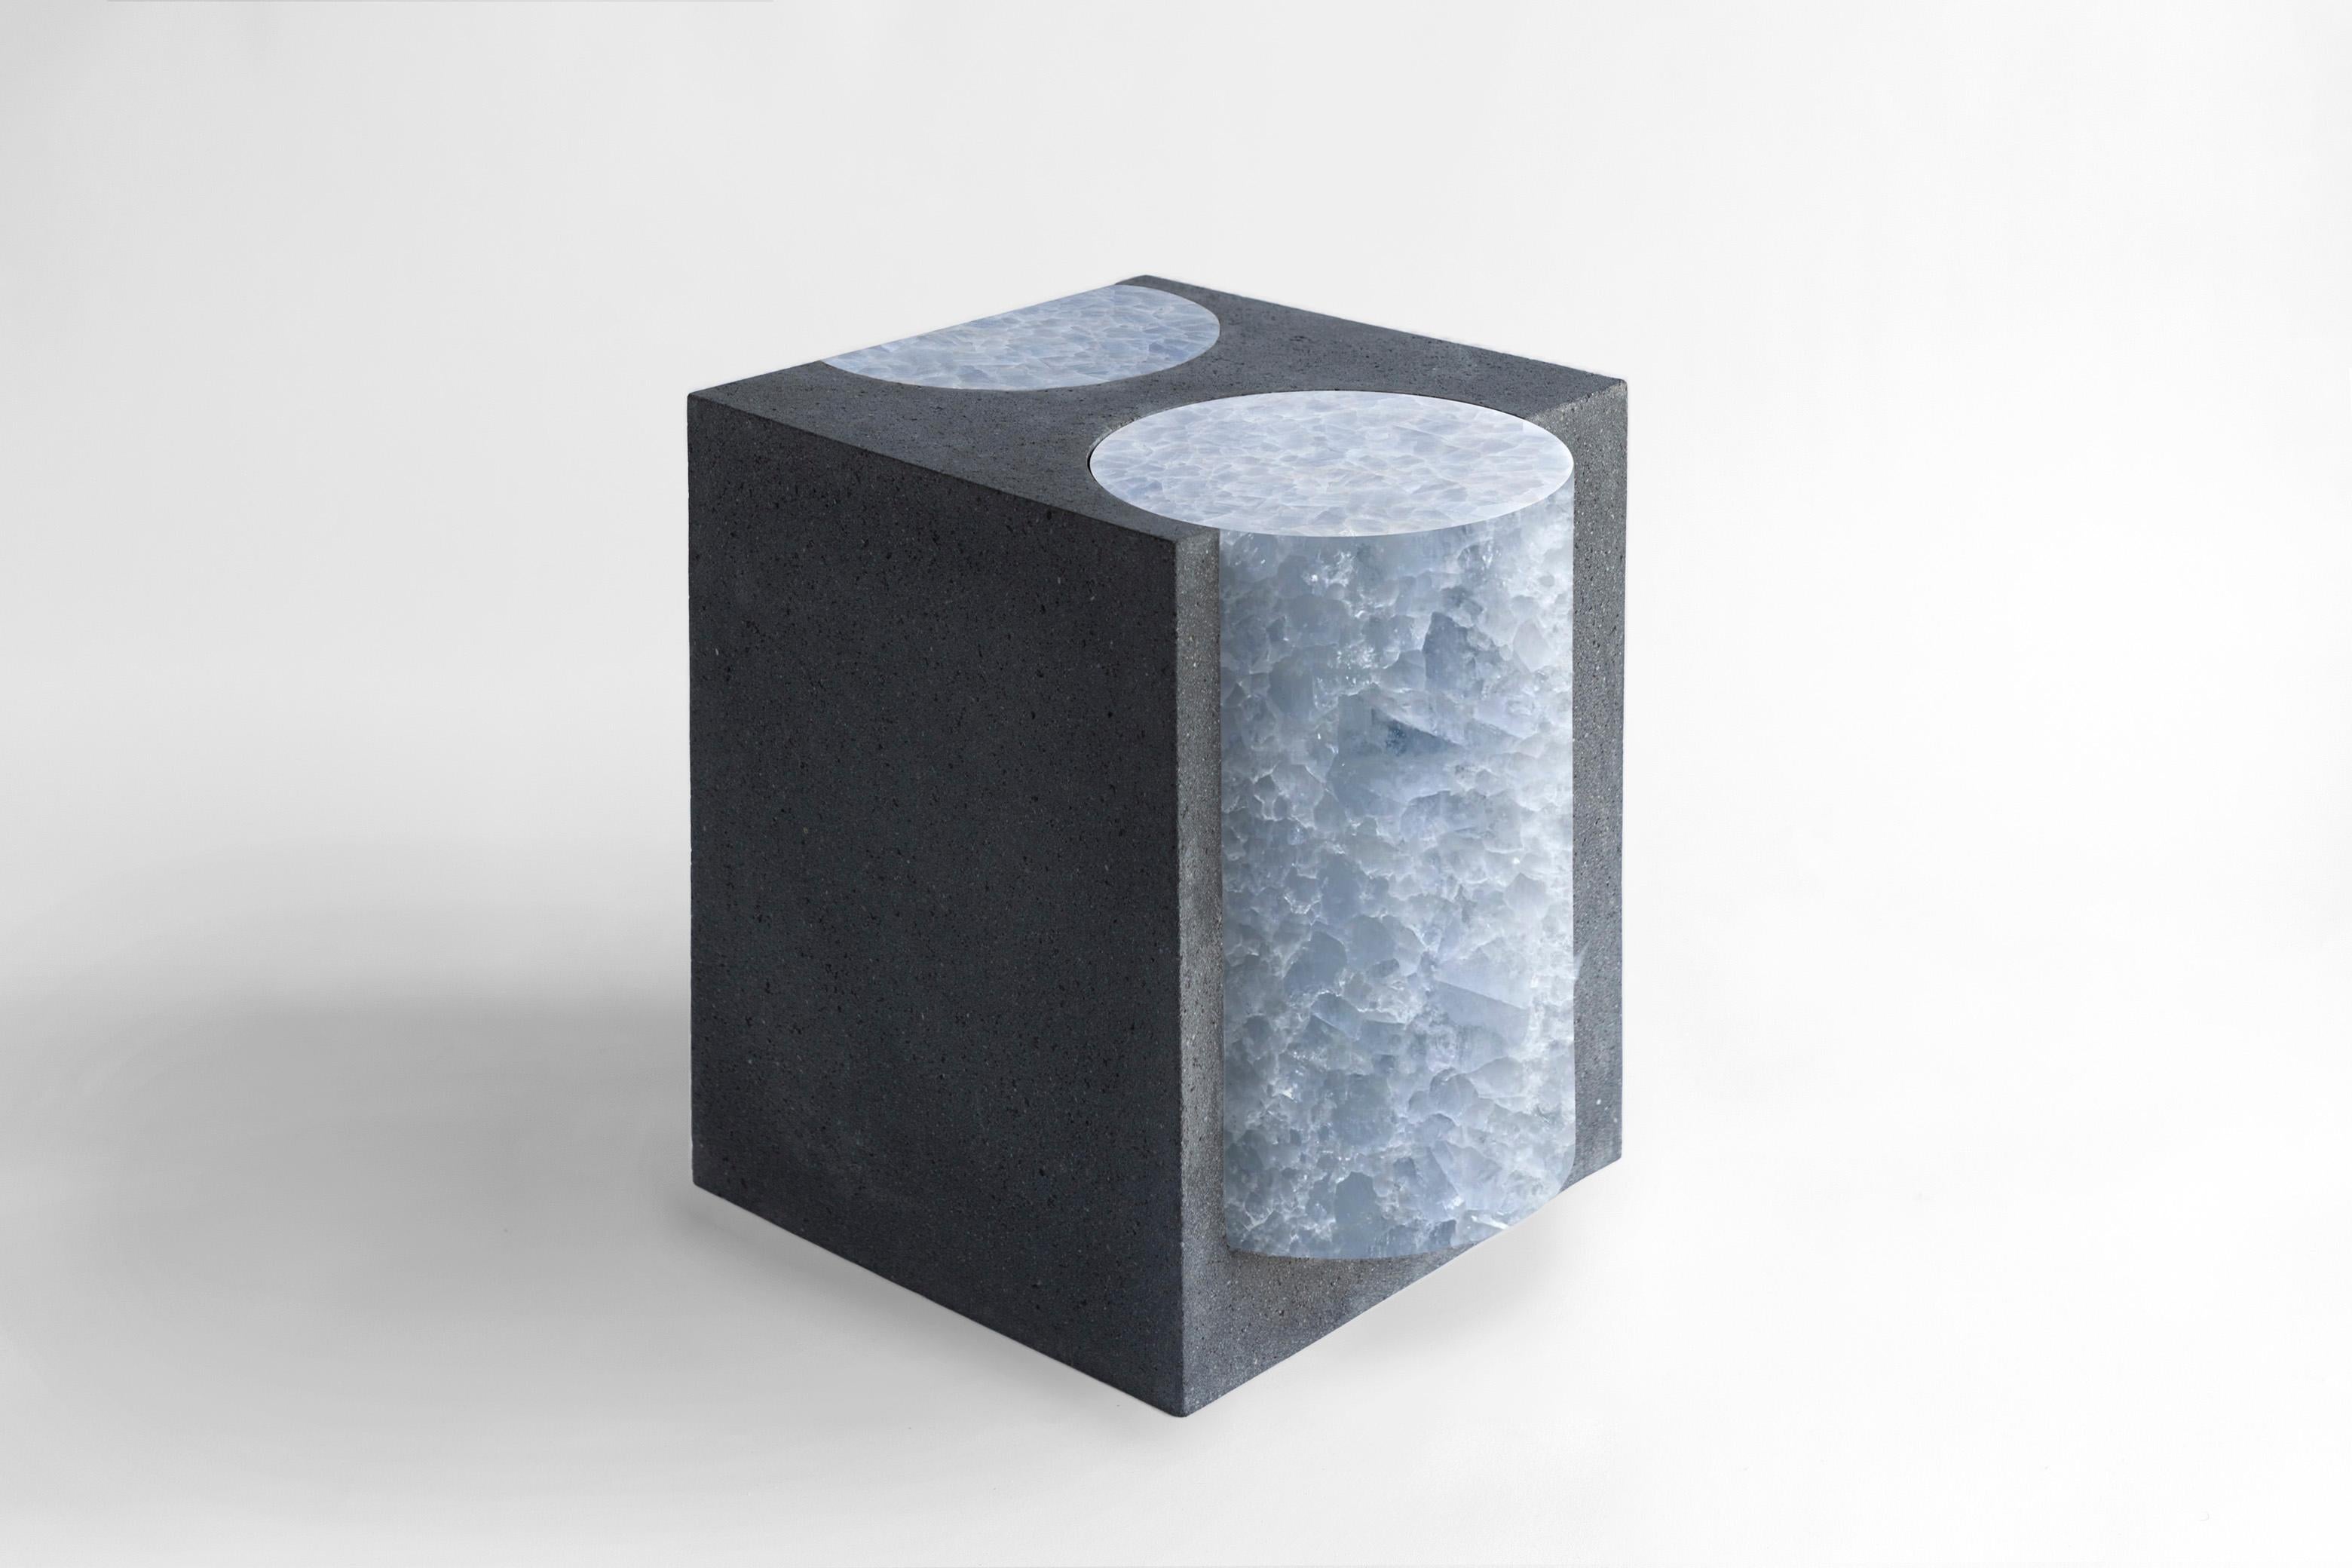 Volcanic Shade I by Sten Studio

Lava stone and natural stone

16 x 12.9 x 16.9 in

Serving as a visual metaphor for volcanoes that, through their craters, open faultlines into the Earth’s core, they are made from square-shaped blocks of a variant